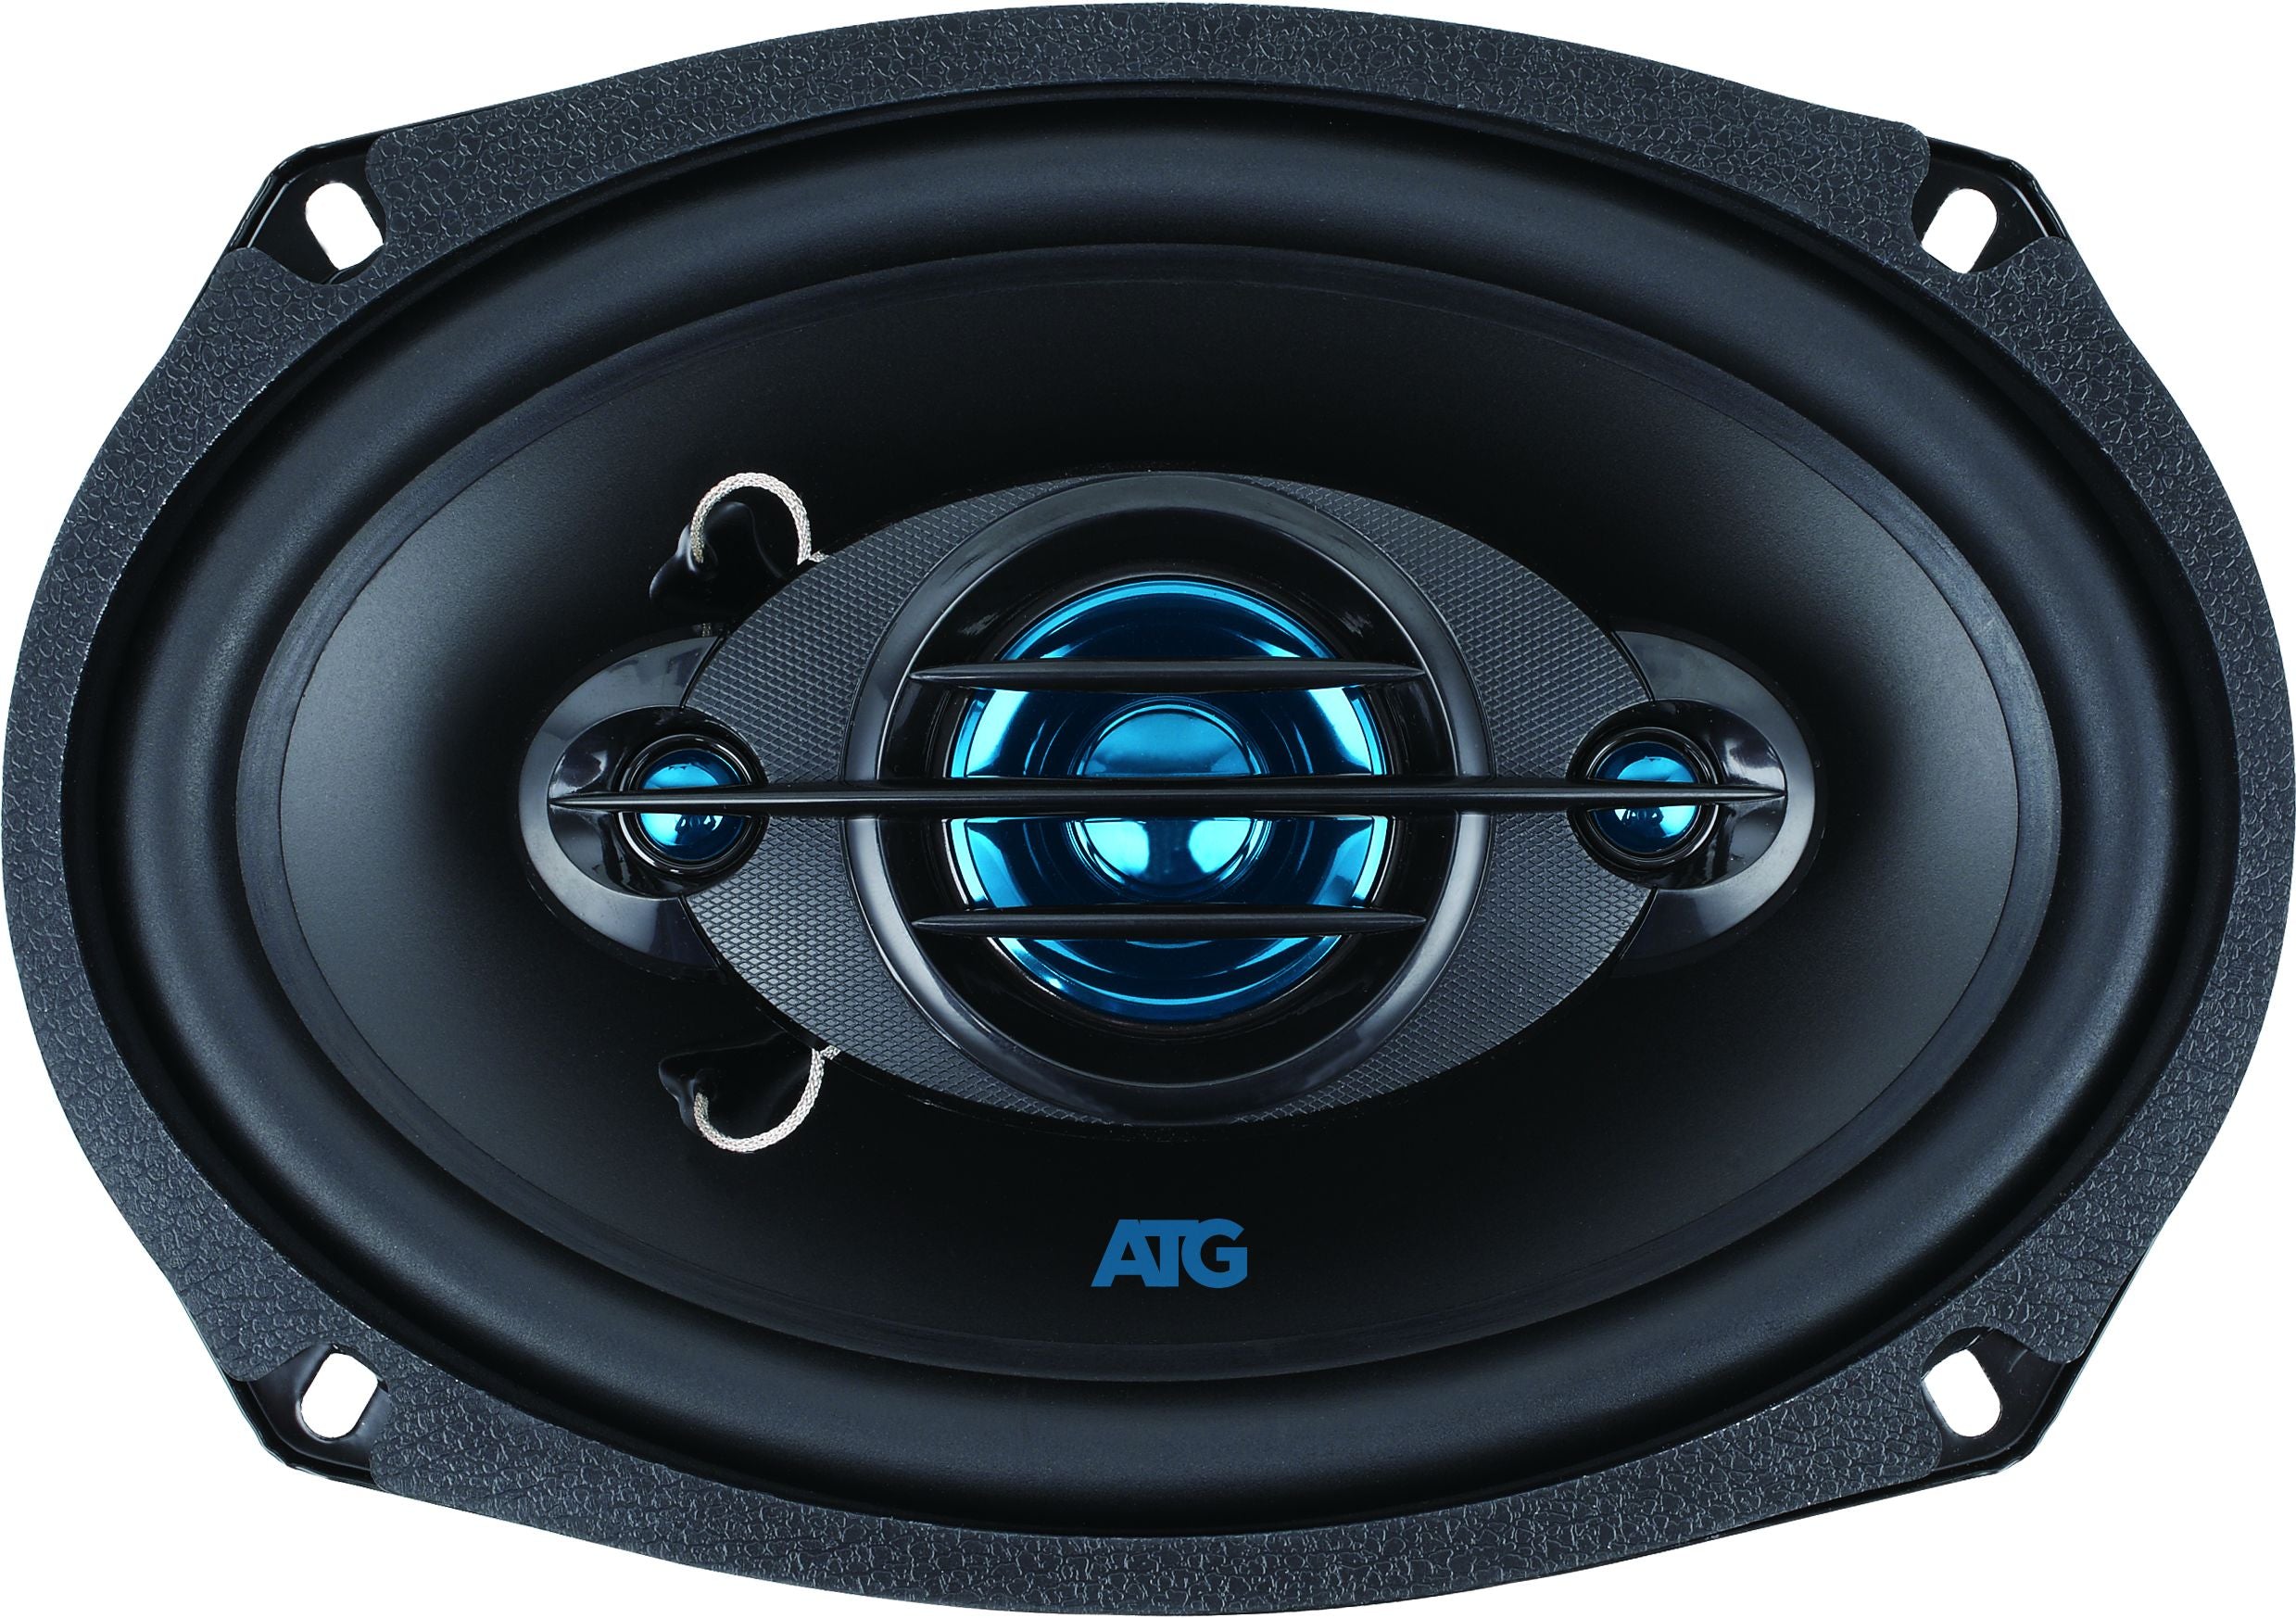 ATG ATG69 - ATG Audio 6X9 3-Way Coaxial Speakers w/ Grill